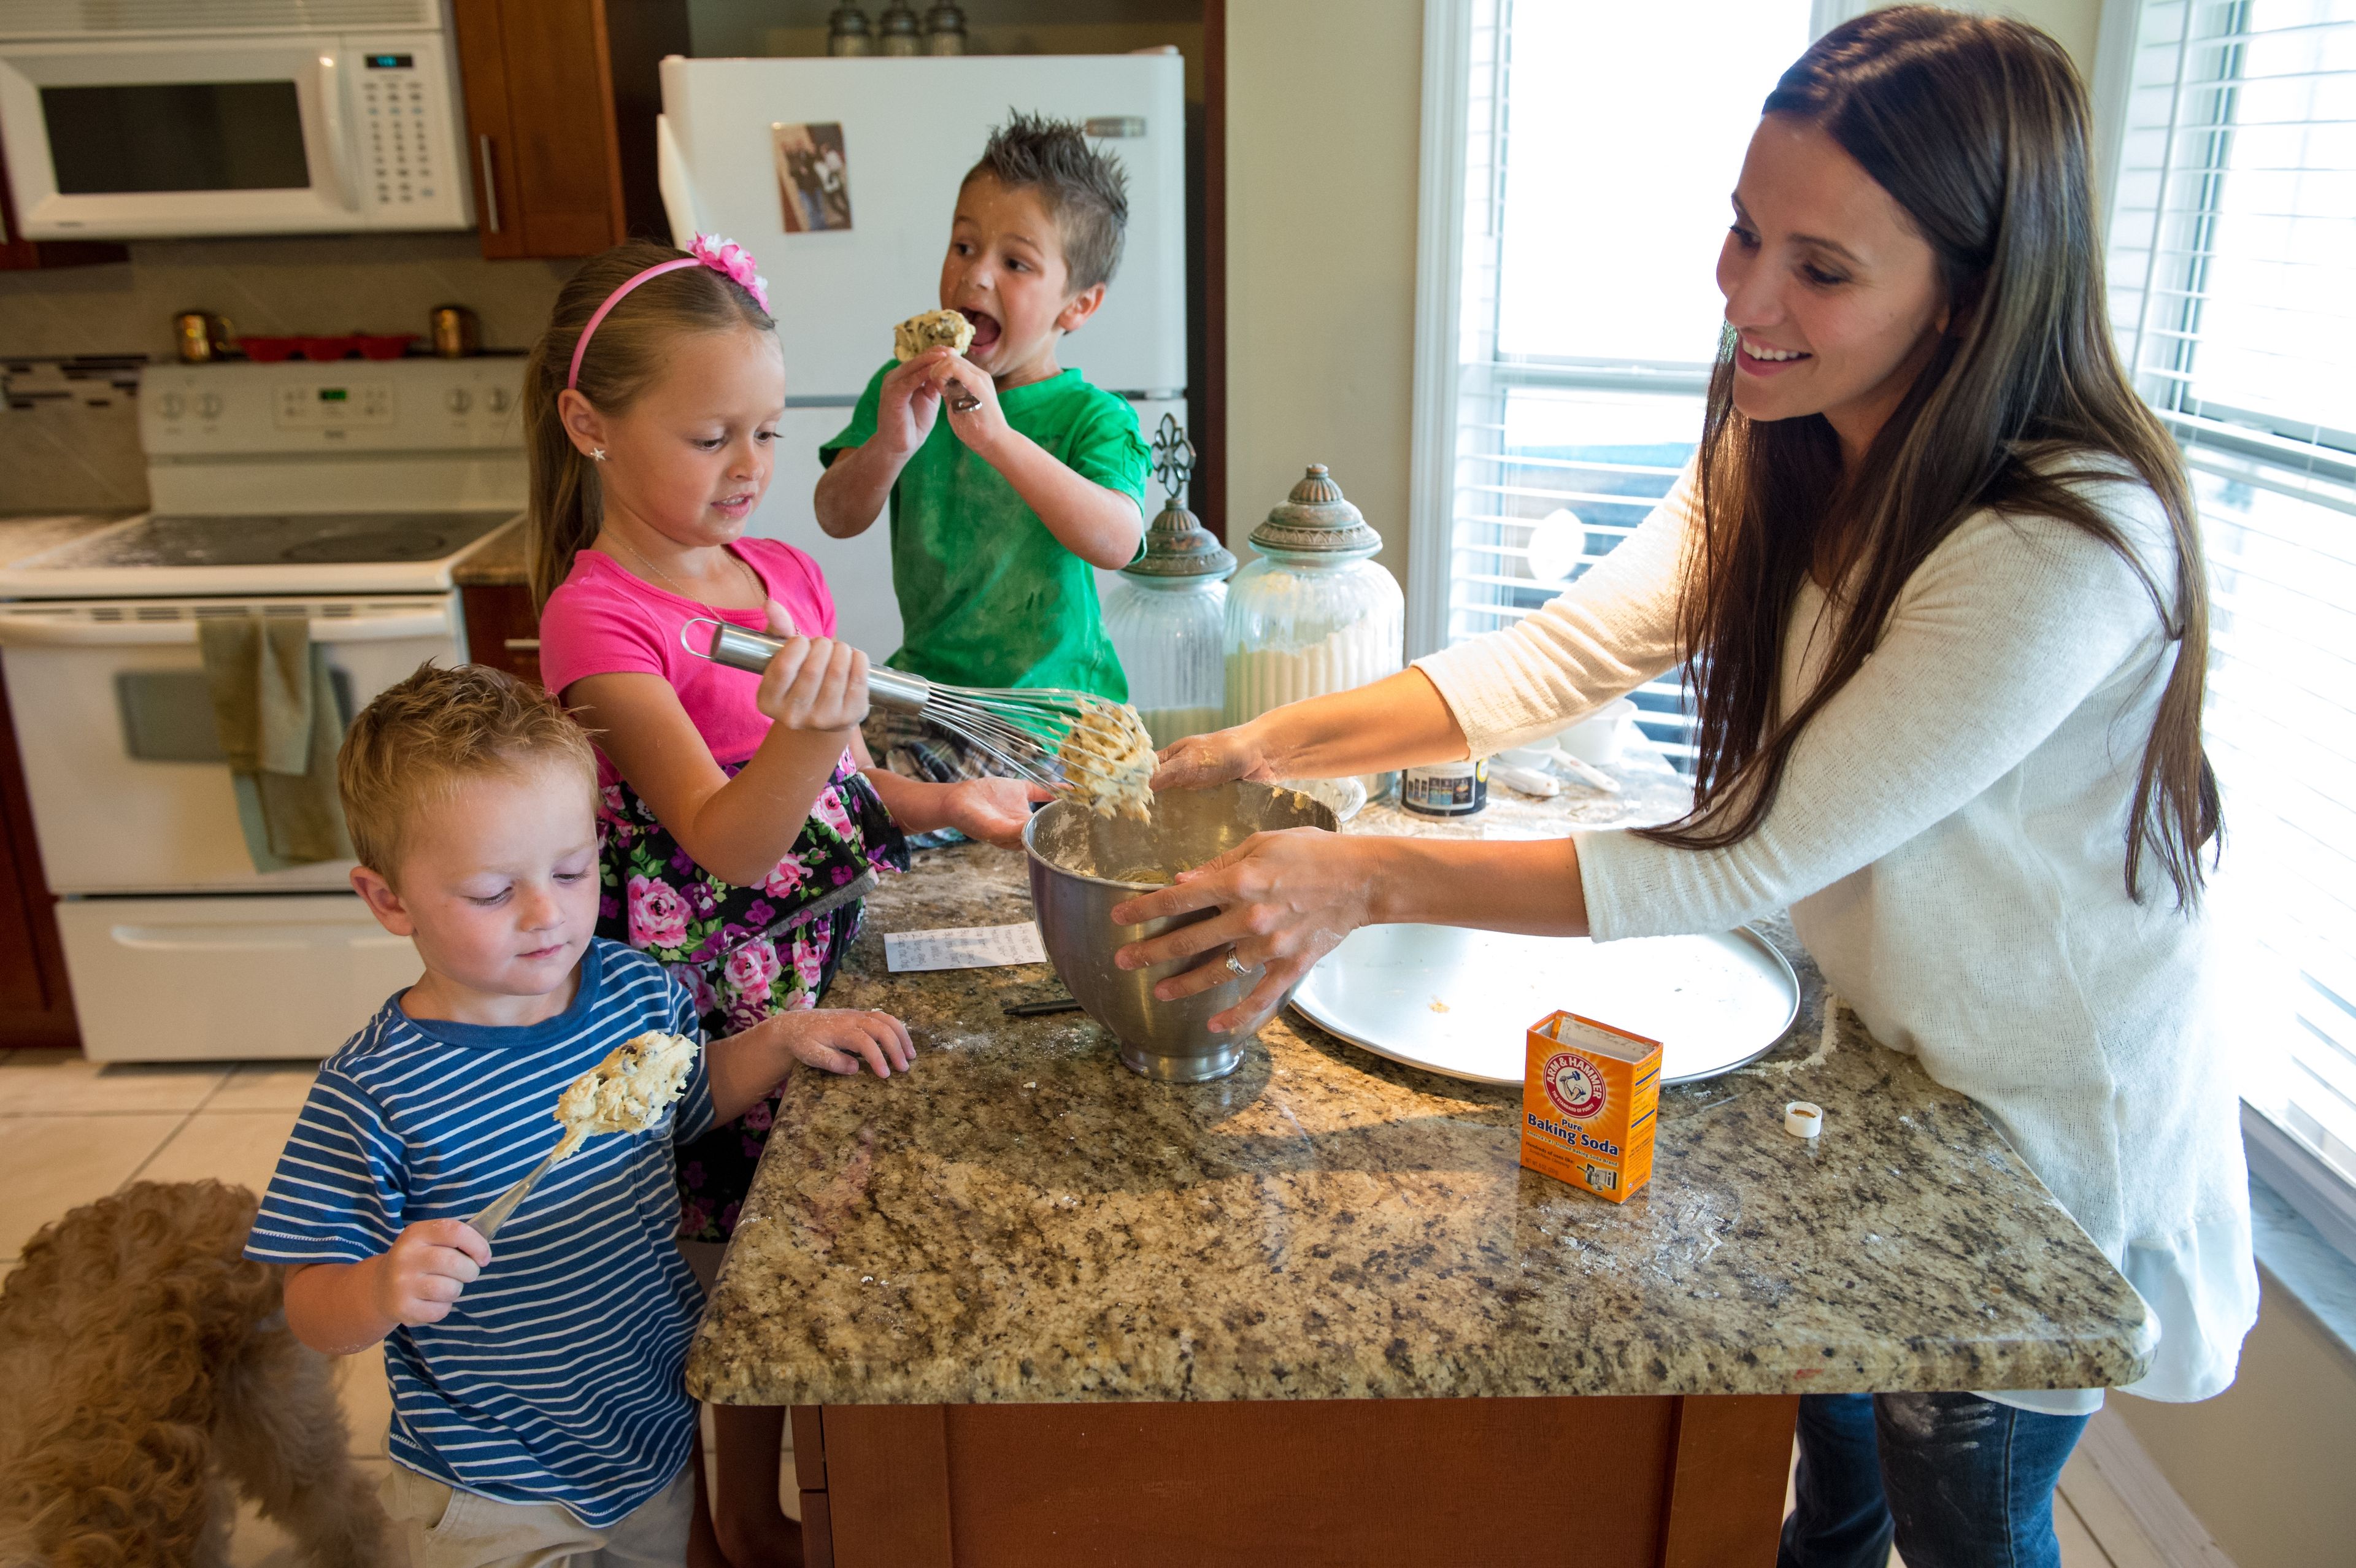 A mother helps her three children make cookies from dough.